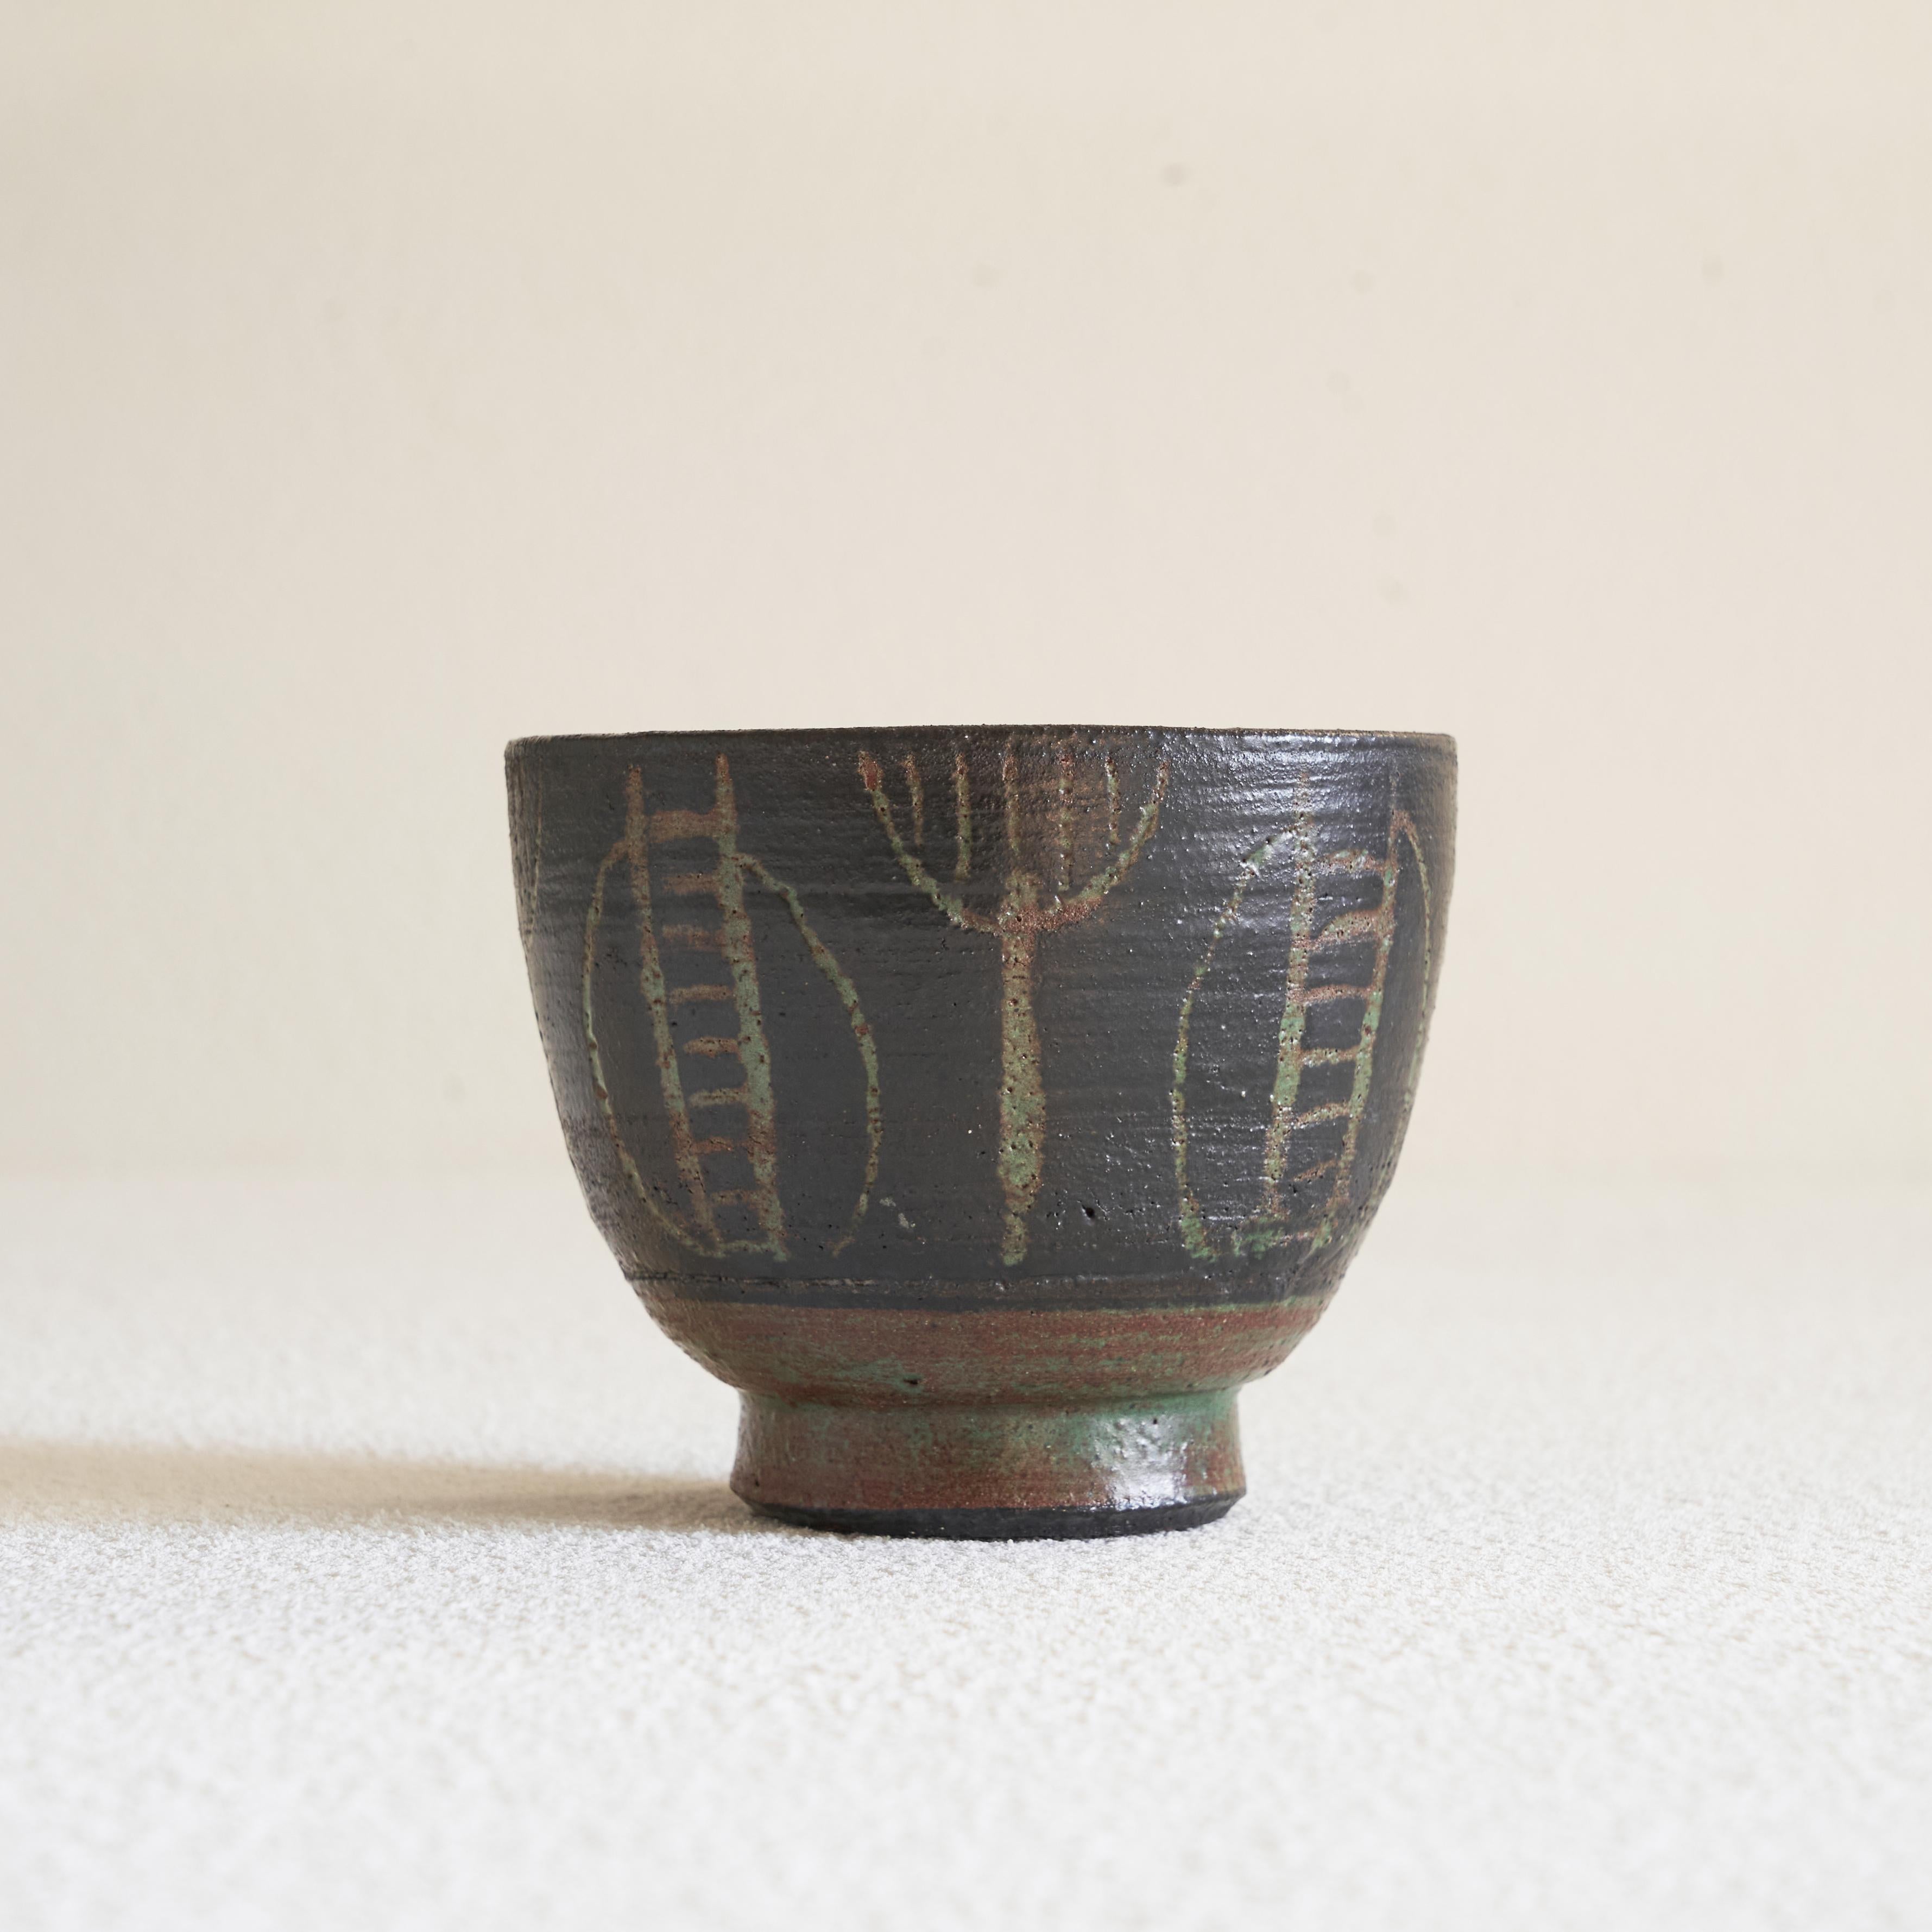 Wim Fiege Mid Century Modernist Studio Pottery Bowl, The Netherlands, 1950s.

This is a wonderful ‘Engobe’ pottery bowl made by Dutch artist Wim Fiege (1914-1978). He used engobe slurry as a way to give his works a distinct decoration.

‘Engobes